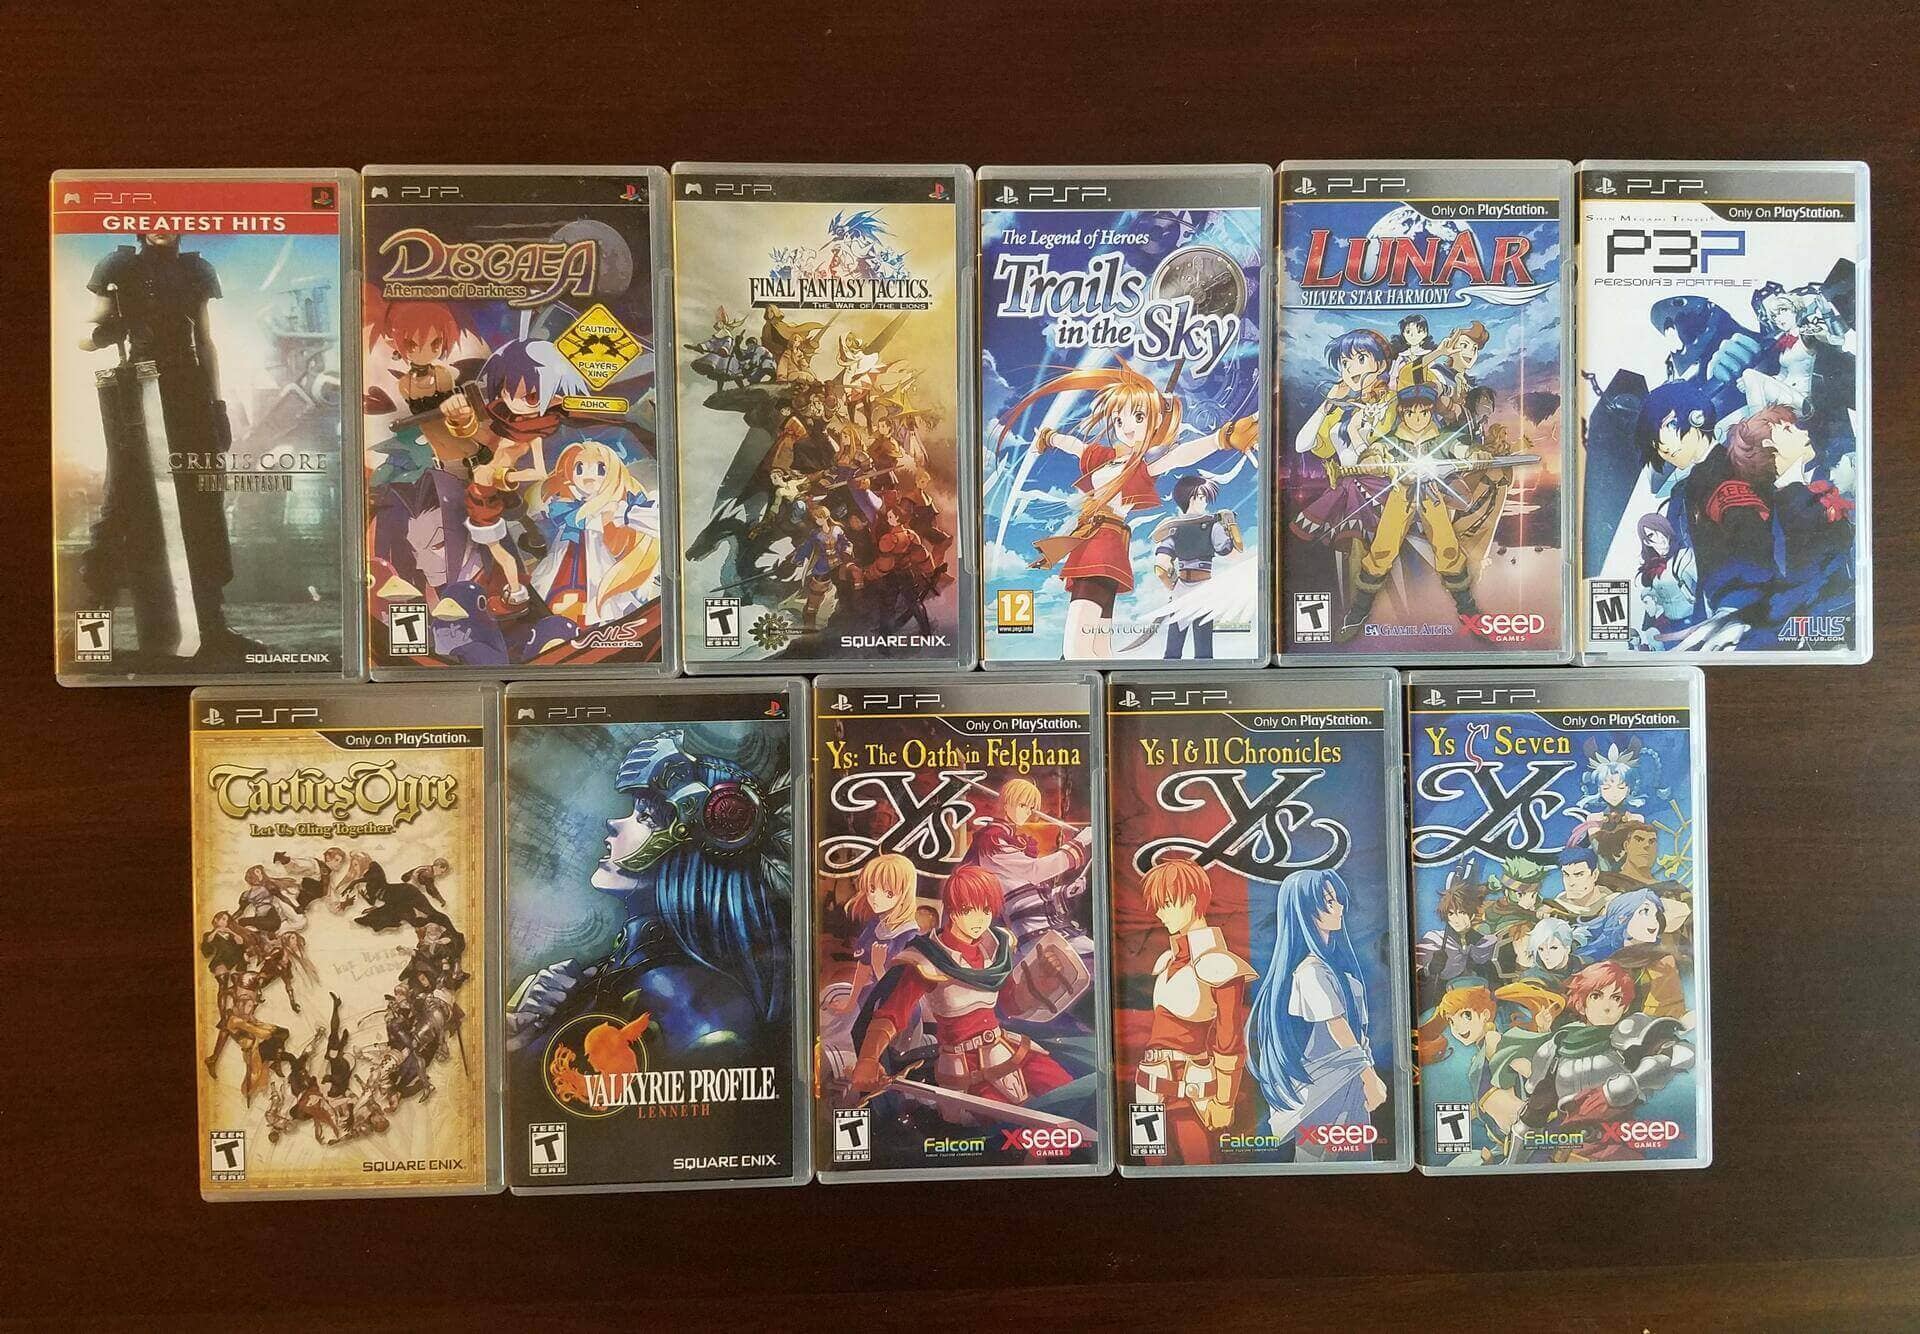 PlayStation Portable was home to some epic JRPGs